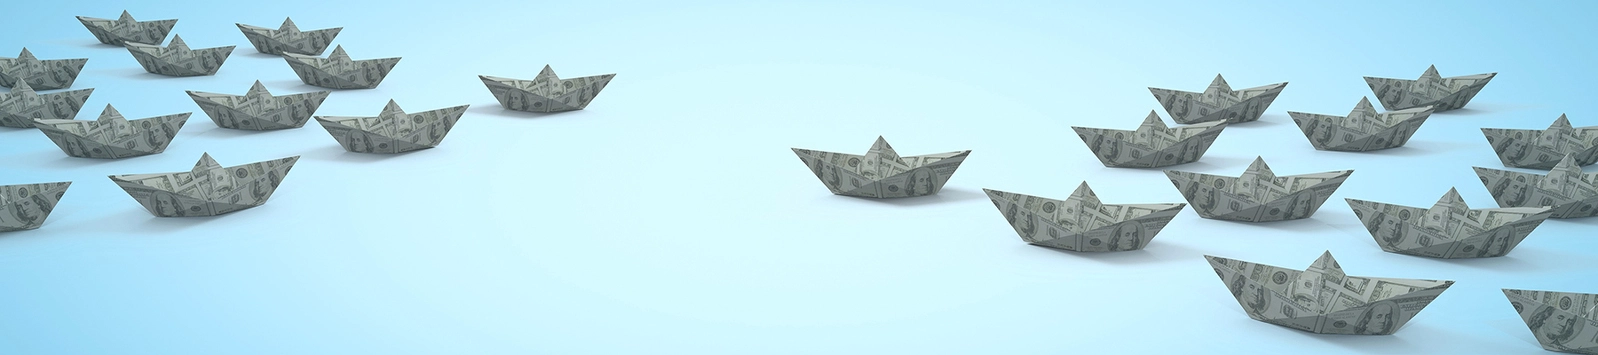 origami boats made from dollar bills